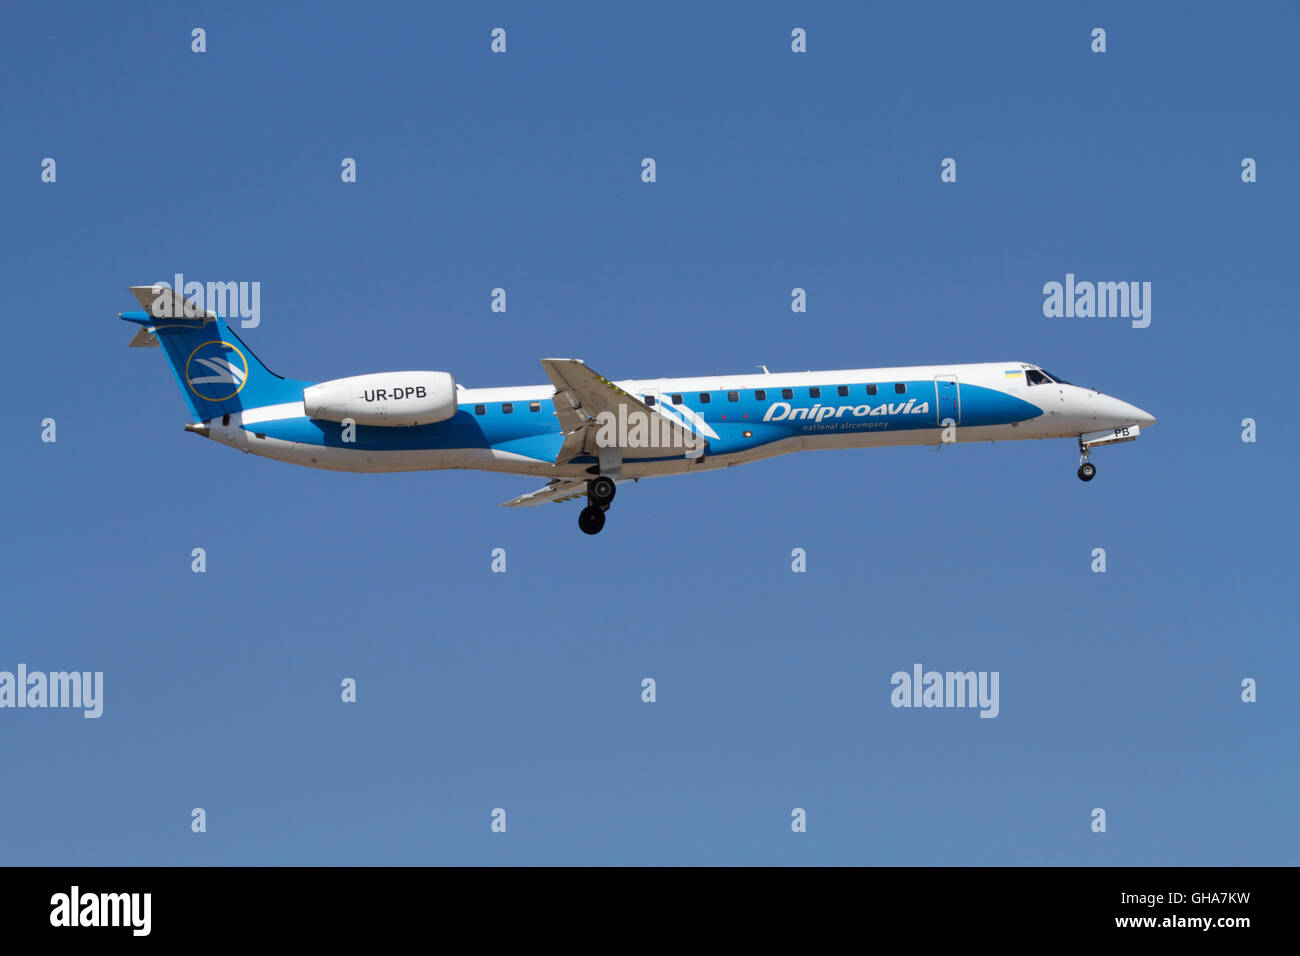 Commercial air travel. Dniproavia Embraer ERJ 145 regional airliner on approach Stock Photo